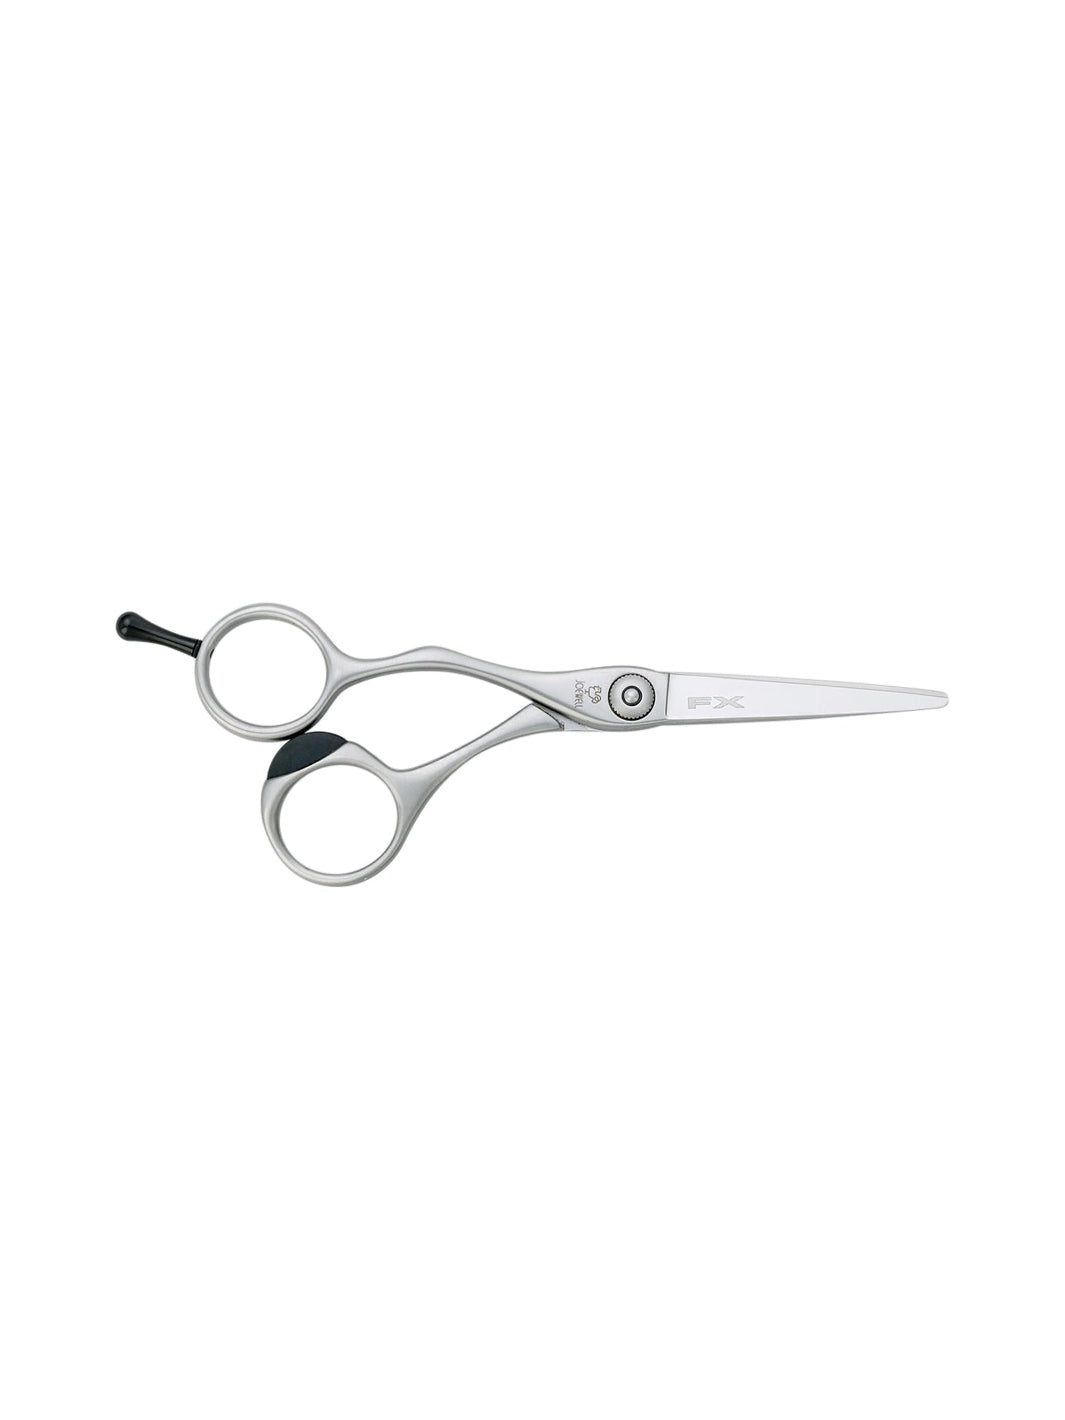 Joewell Super Alloy Flat Blade Left-handed Shears - FXL (5.5in)